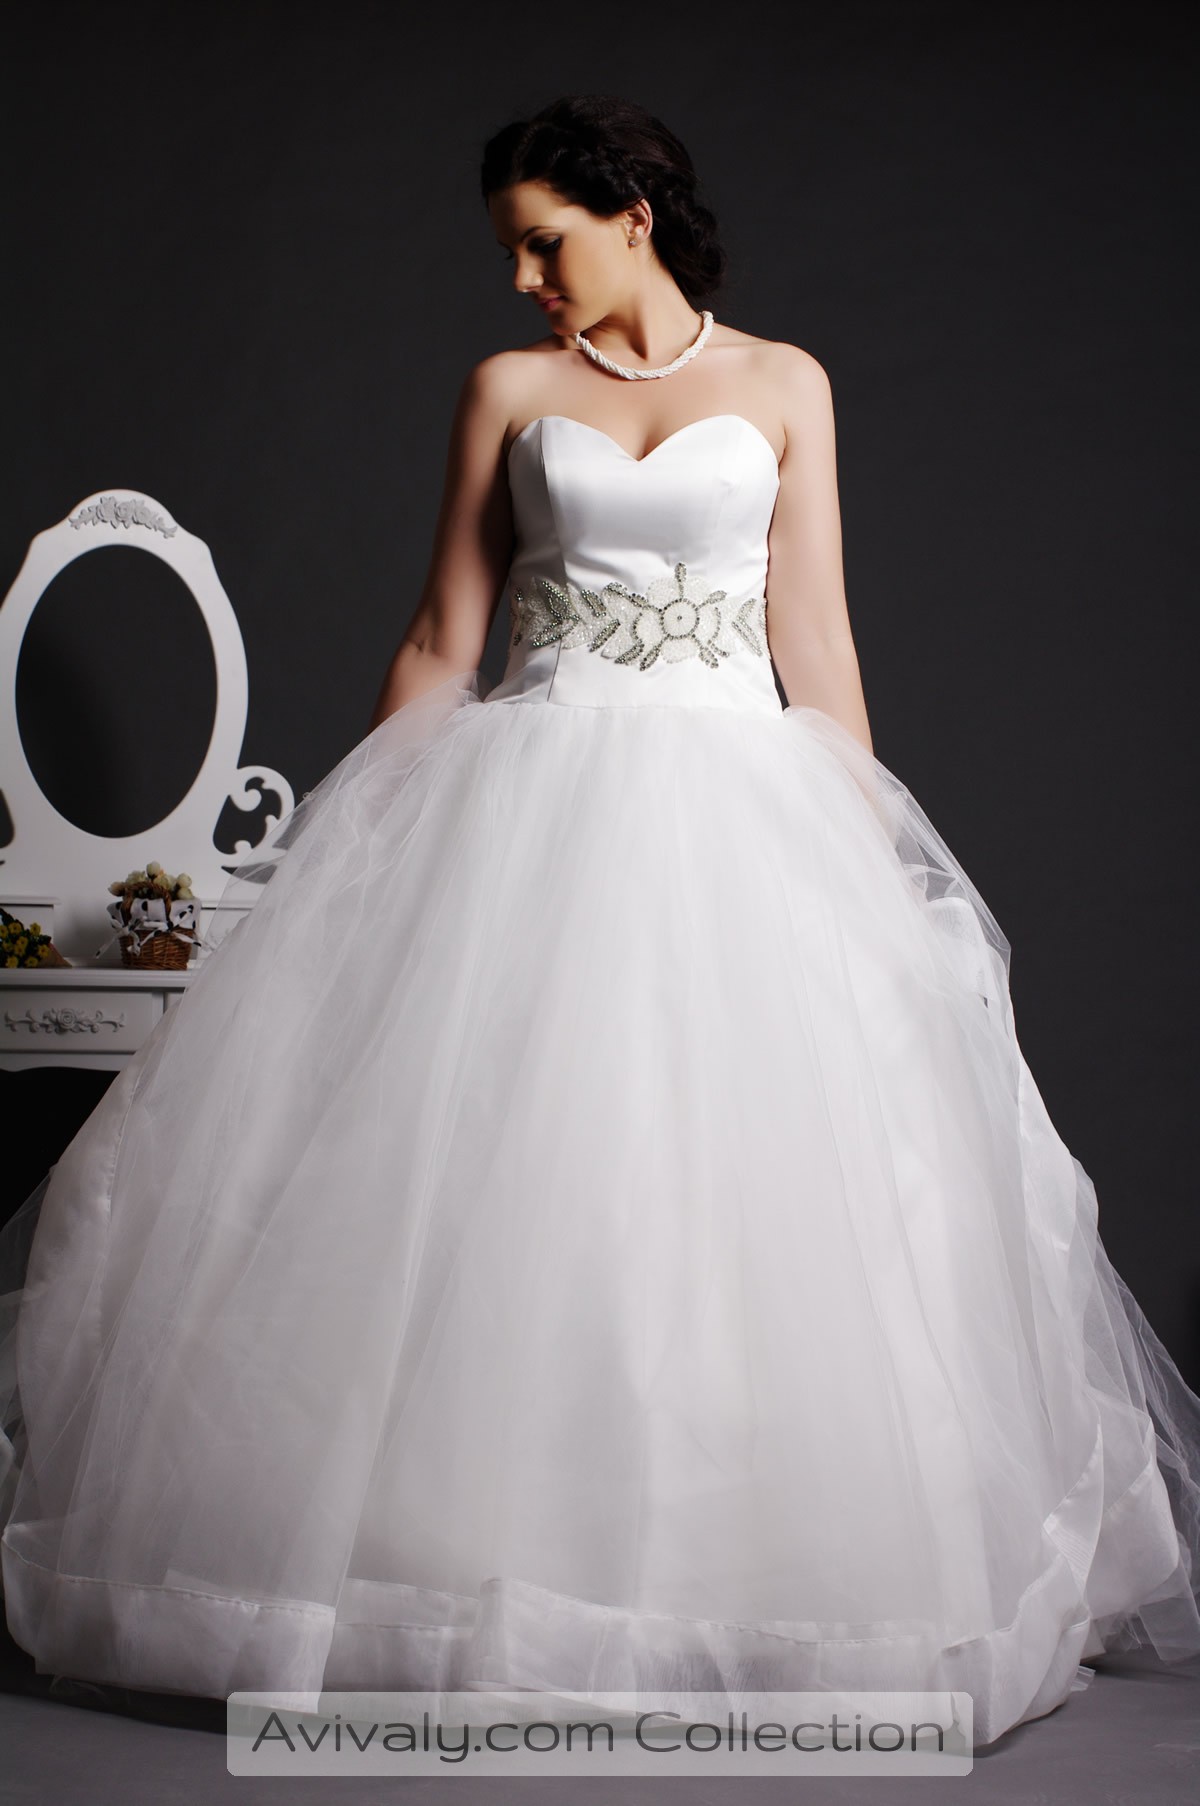 Whity - Strapless Sweetheart Satin Bodice, Layered Tulle Ball Gown Skirt